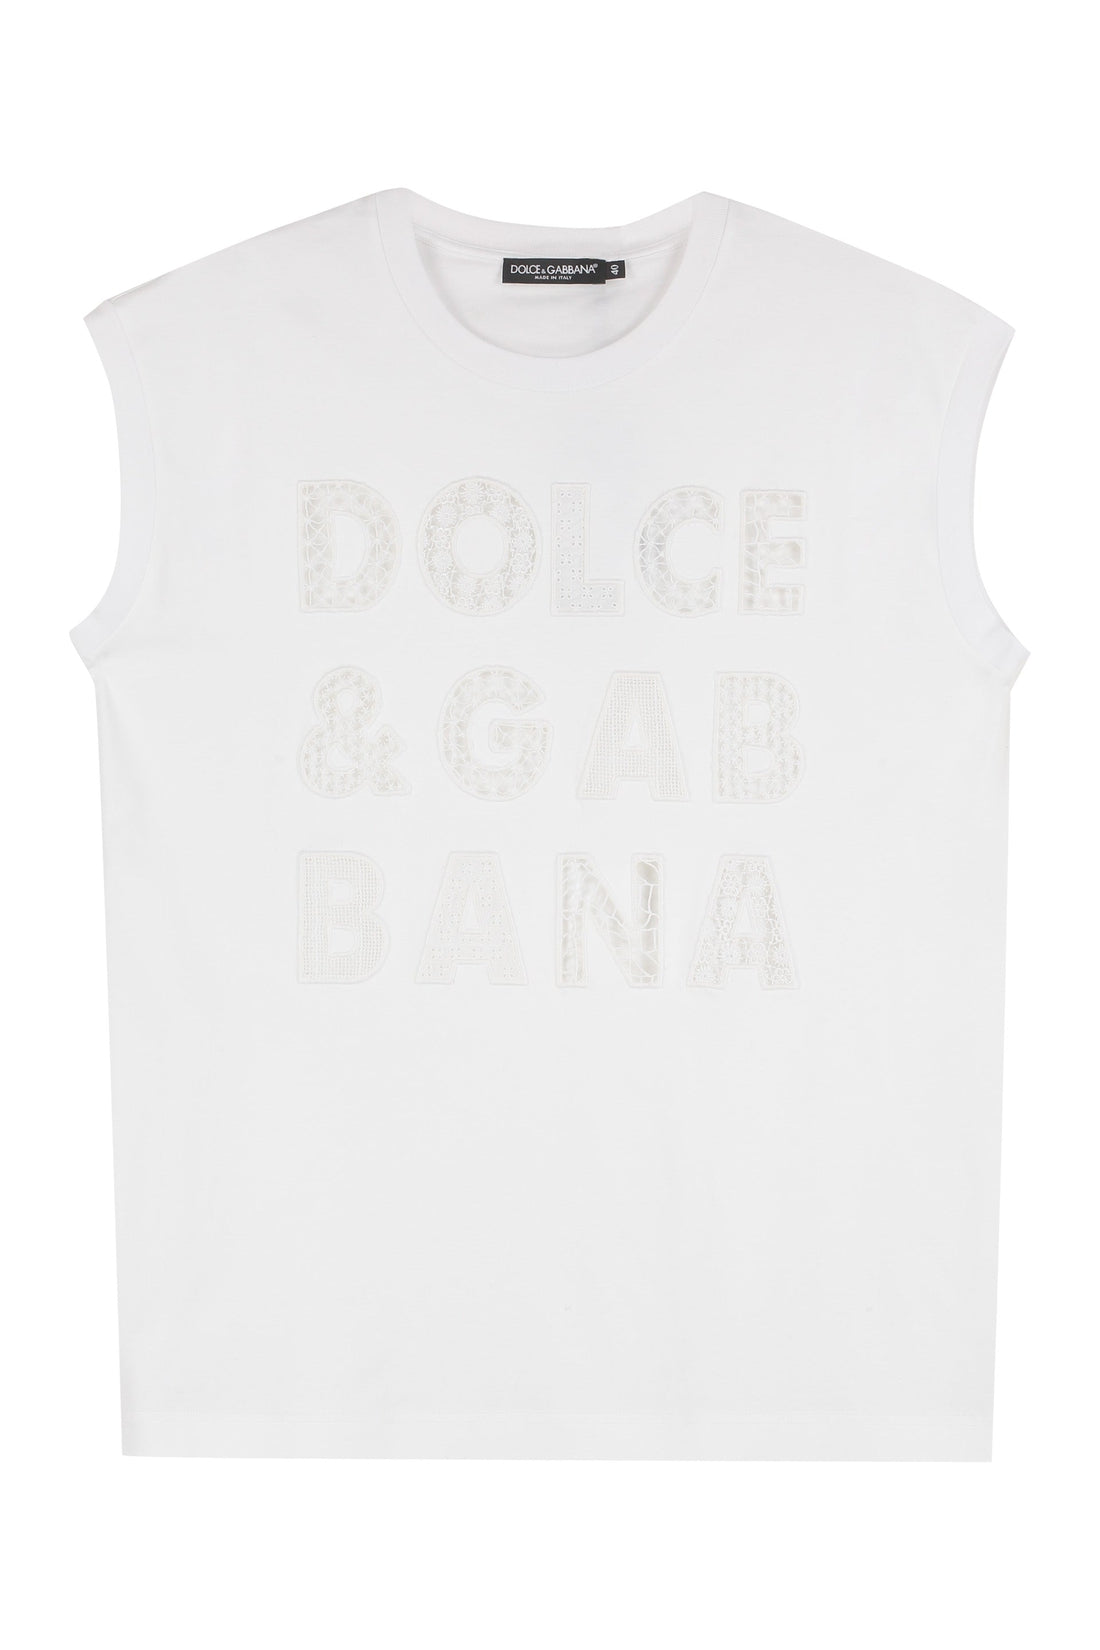 Dolce & Gabbana-OUTLET-SALE-Embroidered cotton top-ARCHIVIST